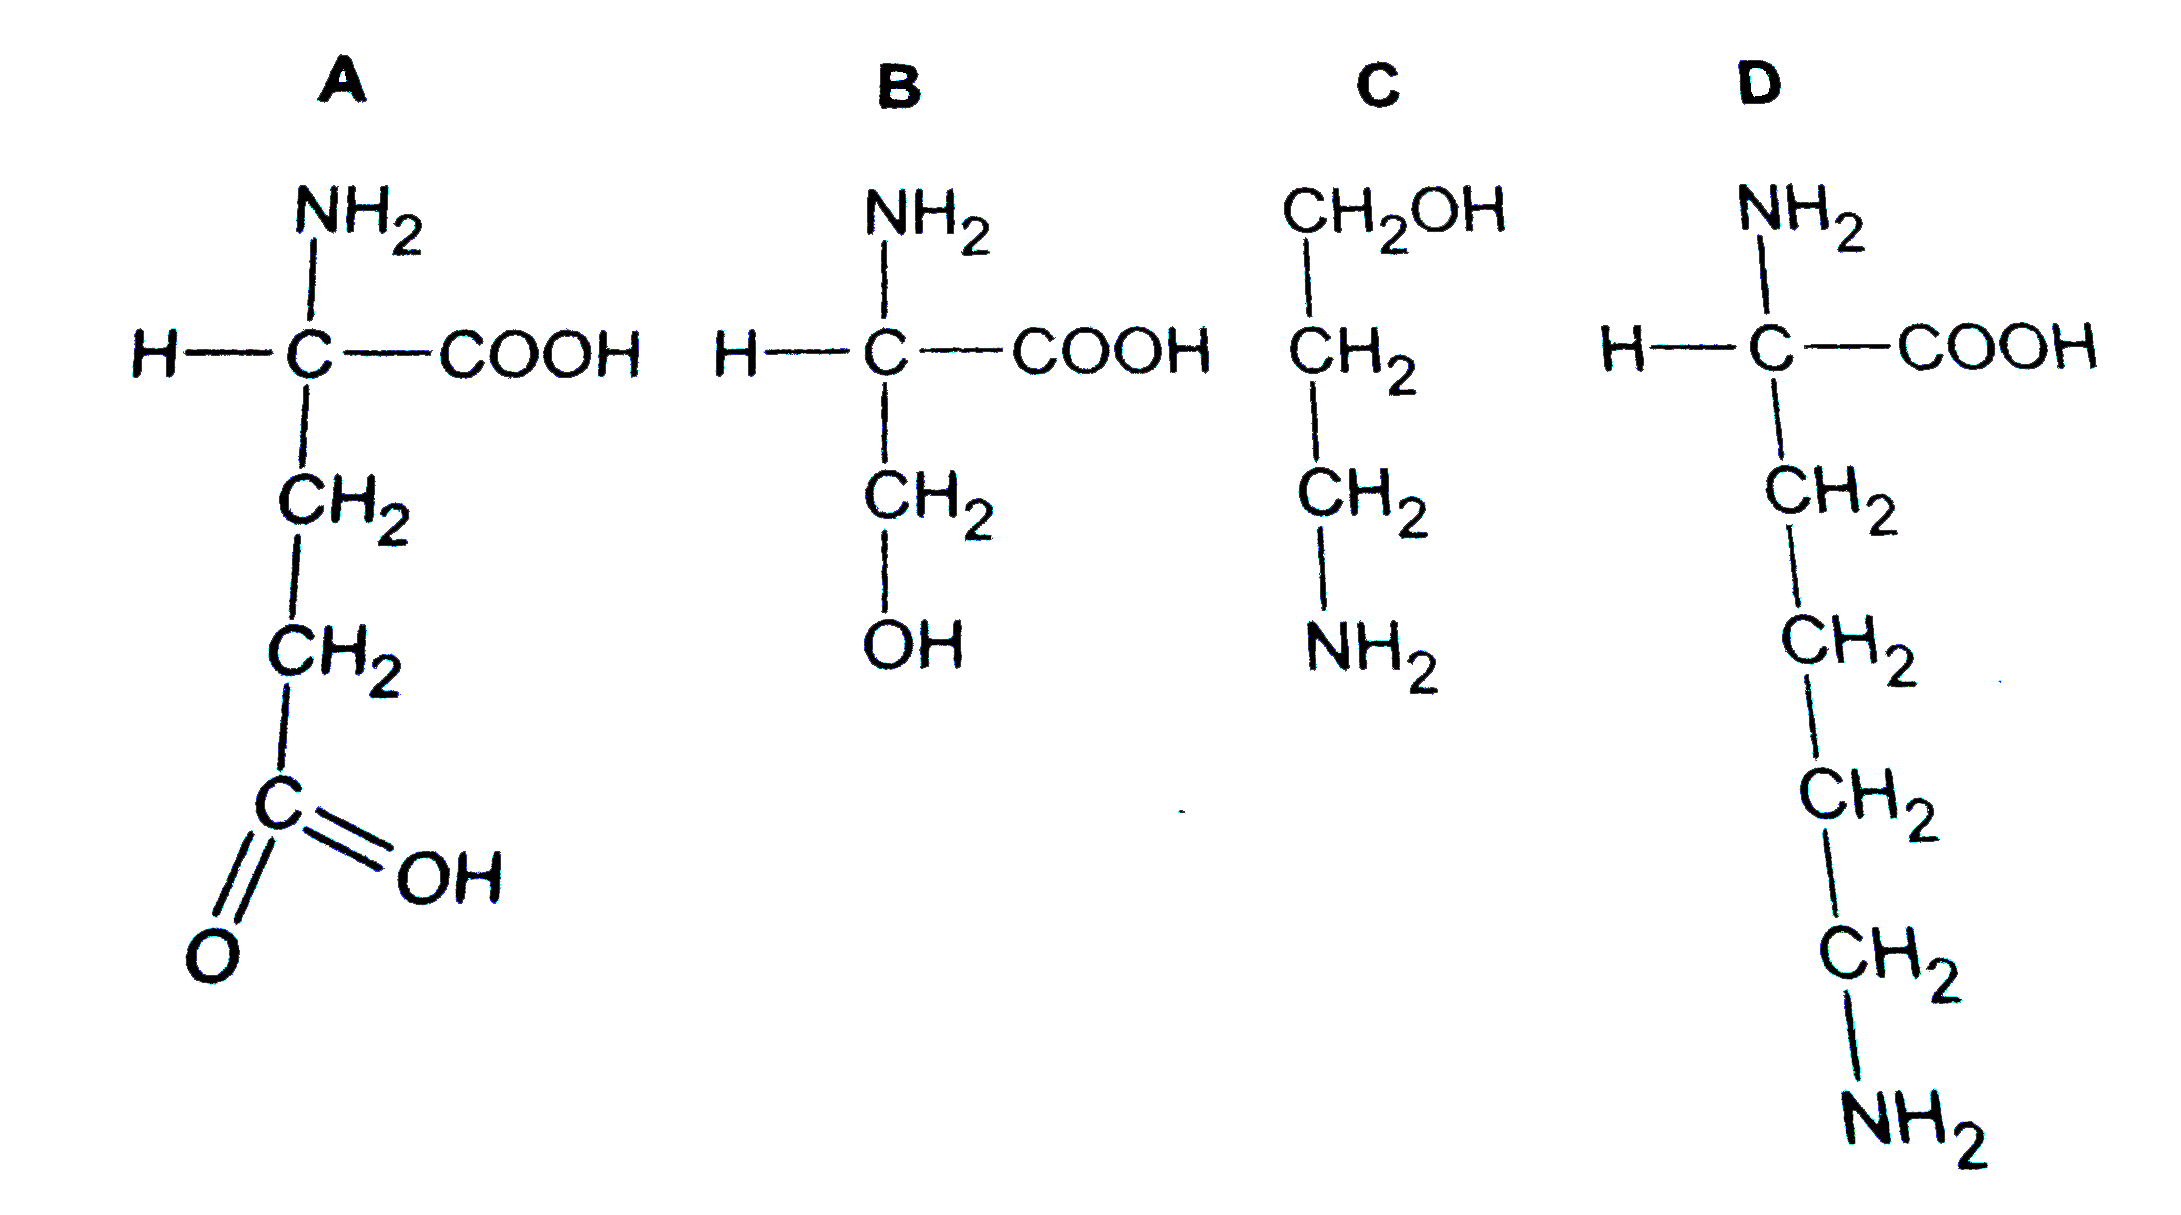 which  one out  of A-D given  below corectly  represents  the  structural  formula  of the  basic  amino acid ?